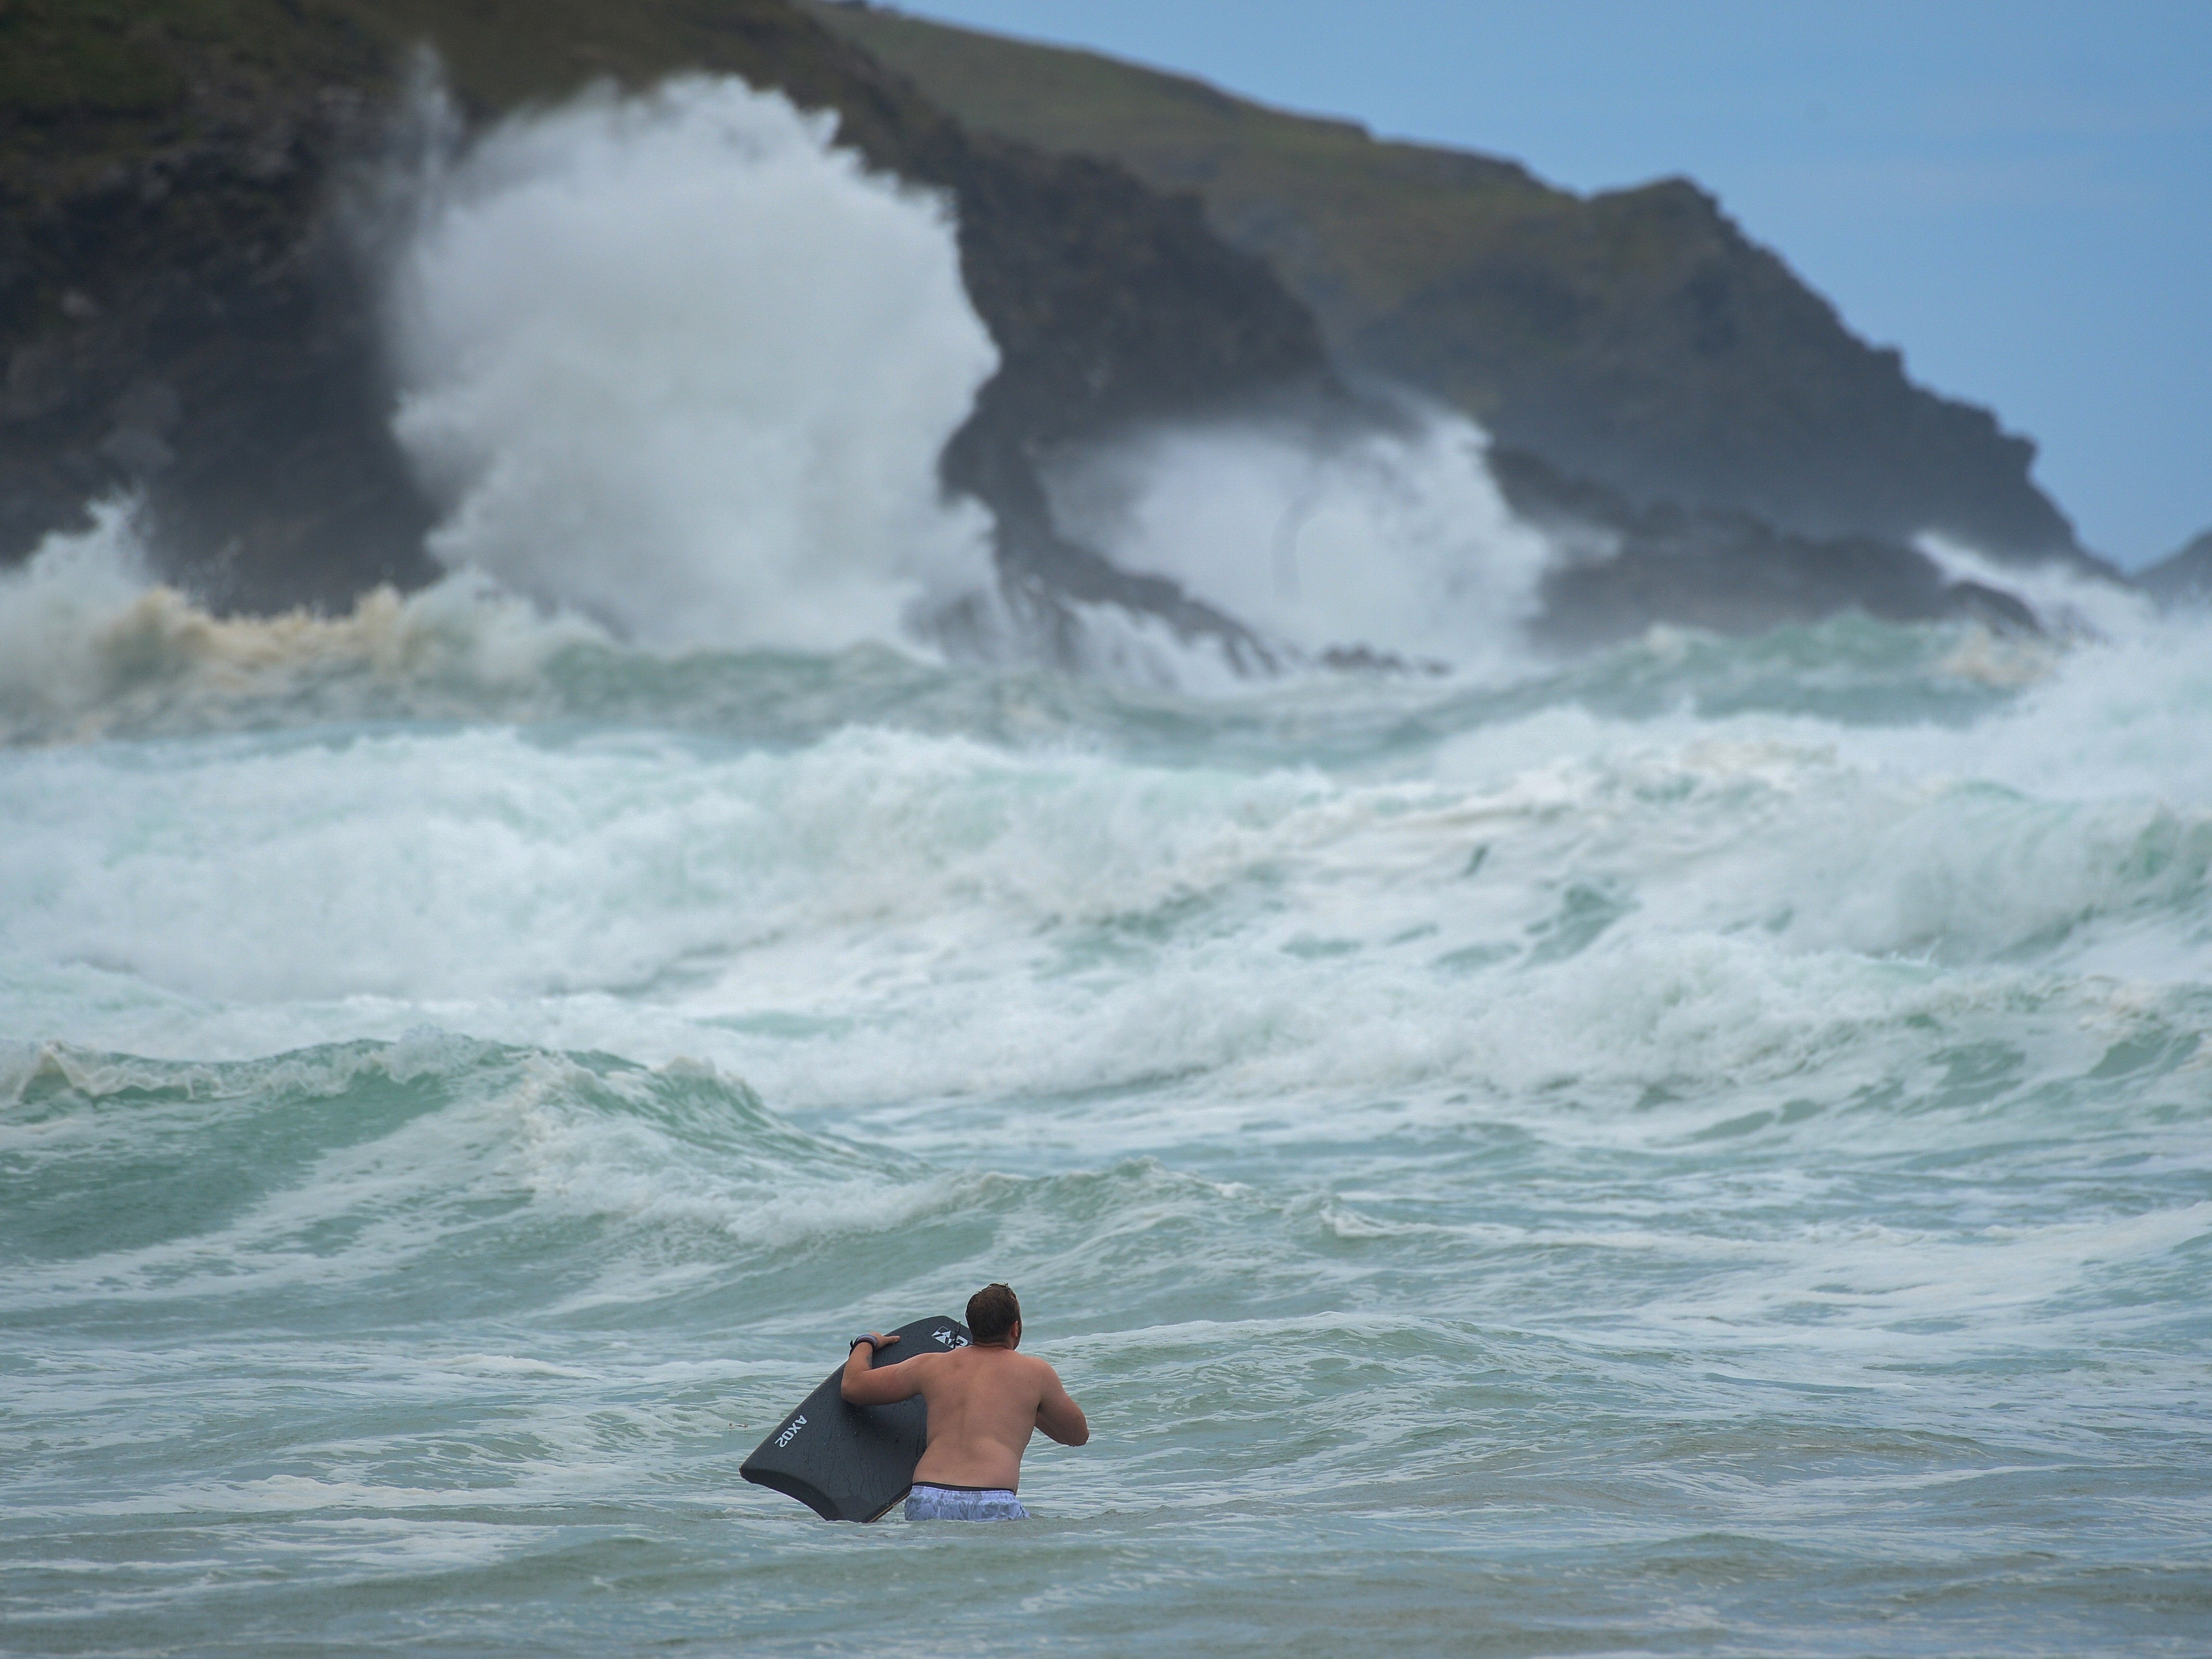 Bodyboarders brave the waves in rough seas at Fistral beach on 30 July 2021 in Newquay, United Kingdom. Storm Evert is the UK’s fourth named storm since October 2020